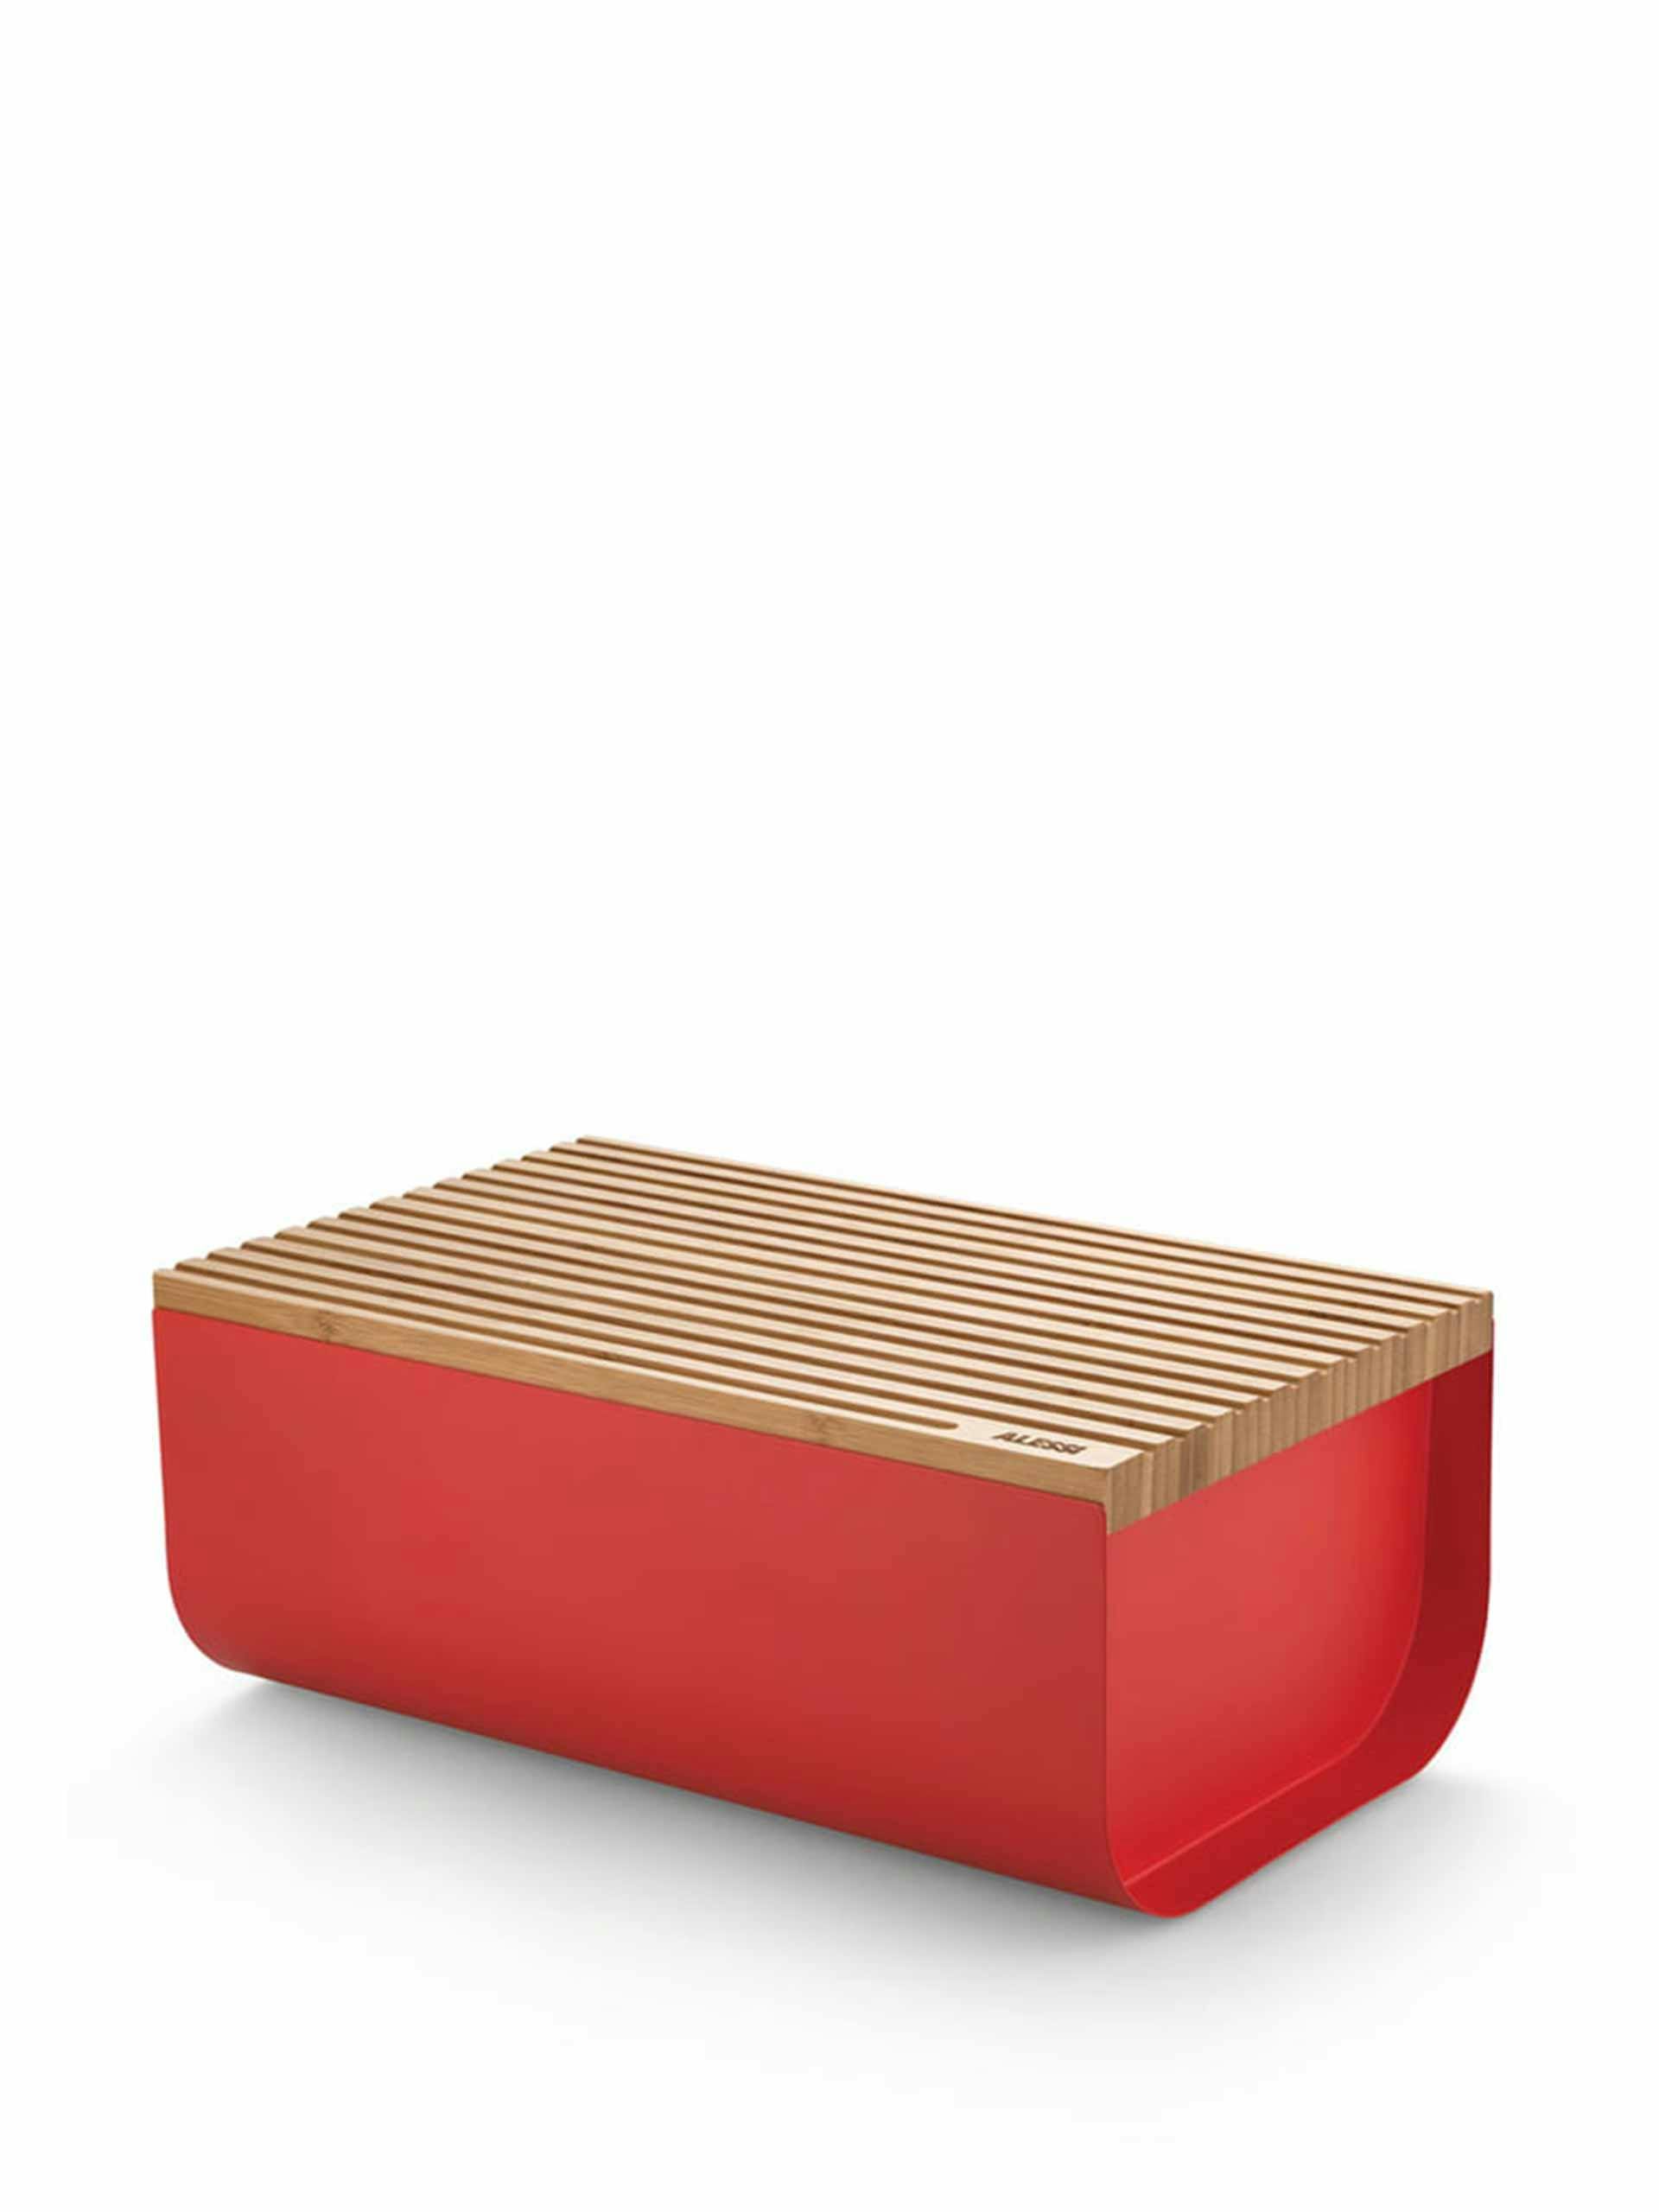 Bread box and board in red